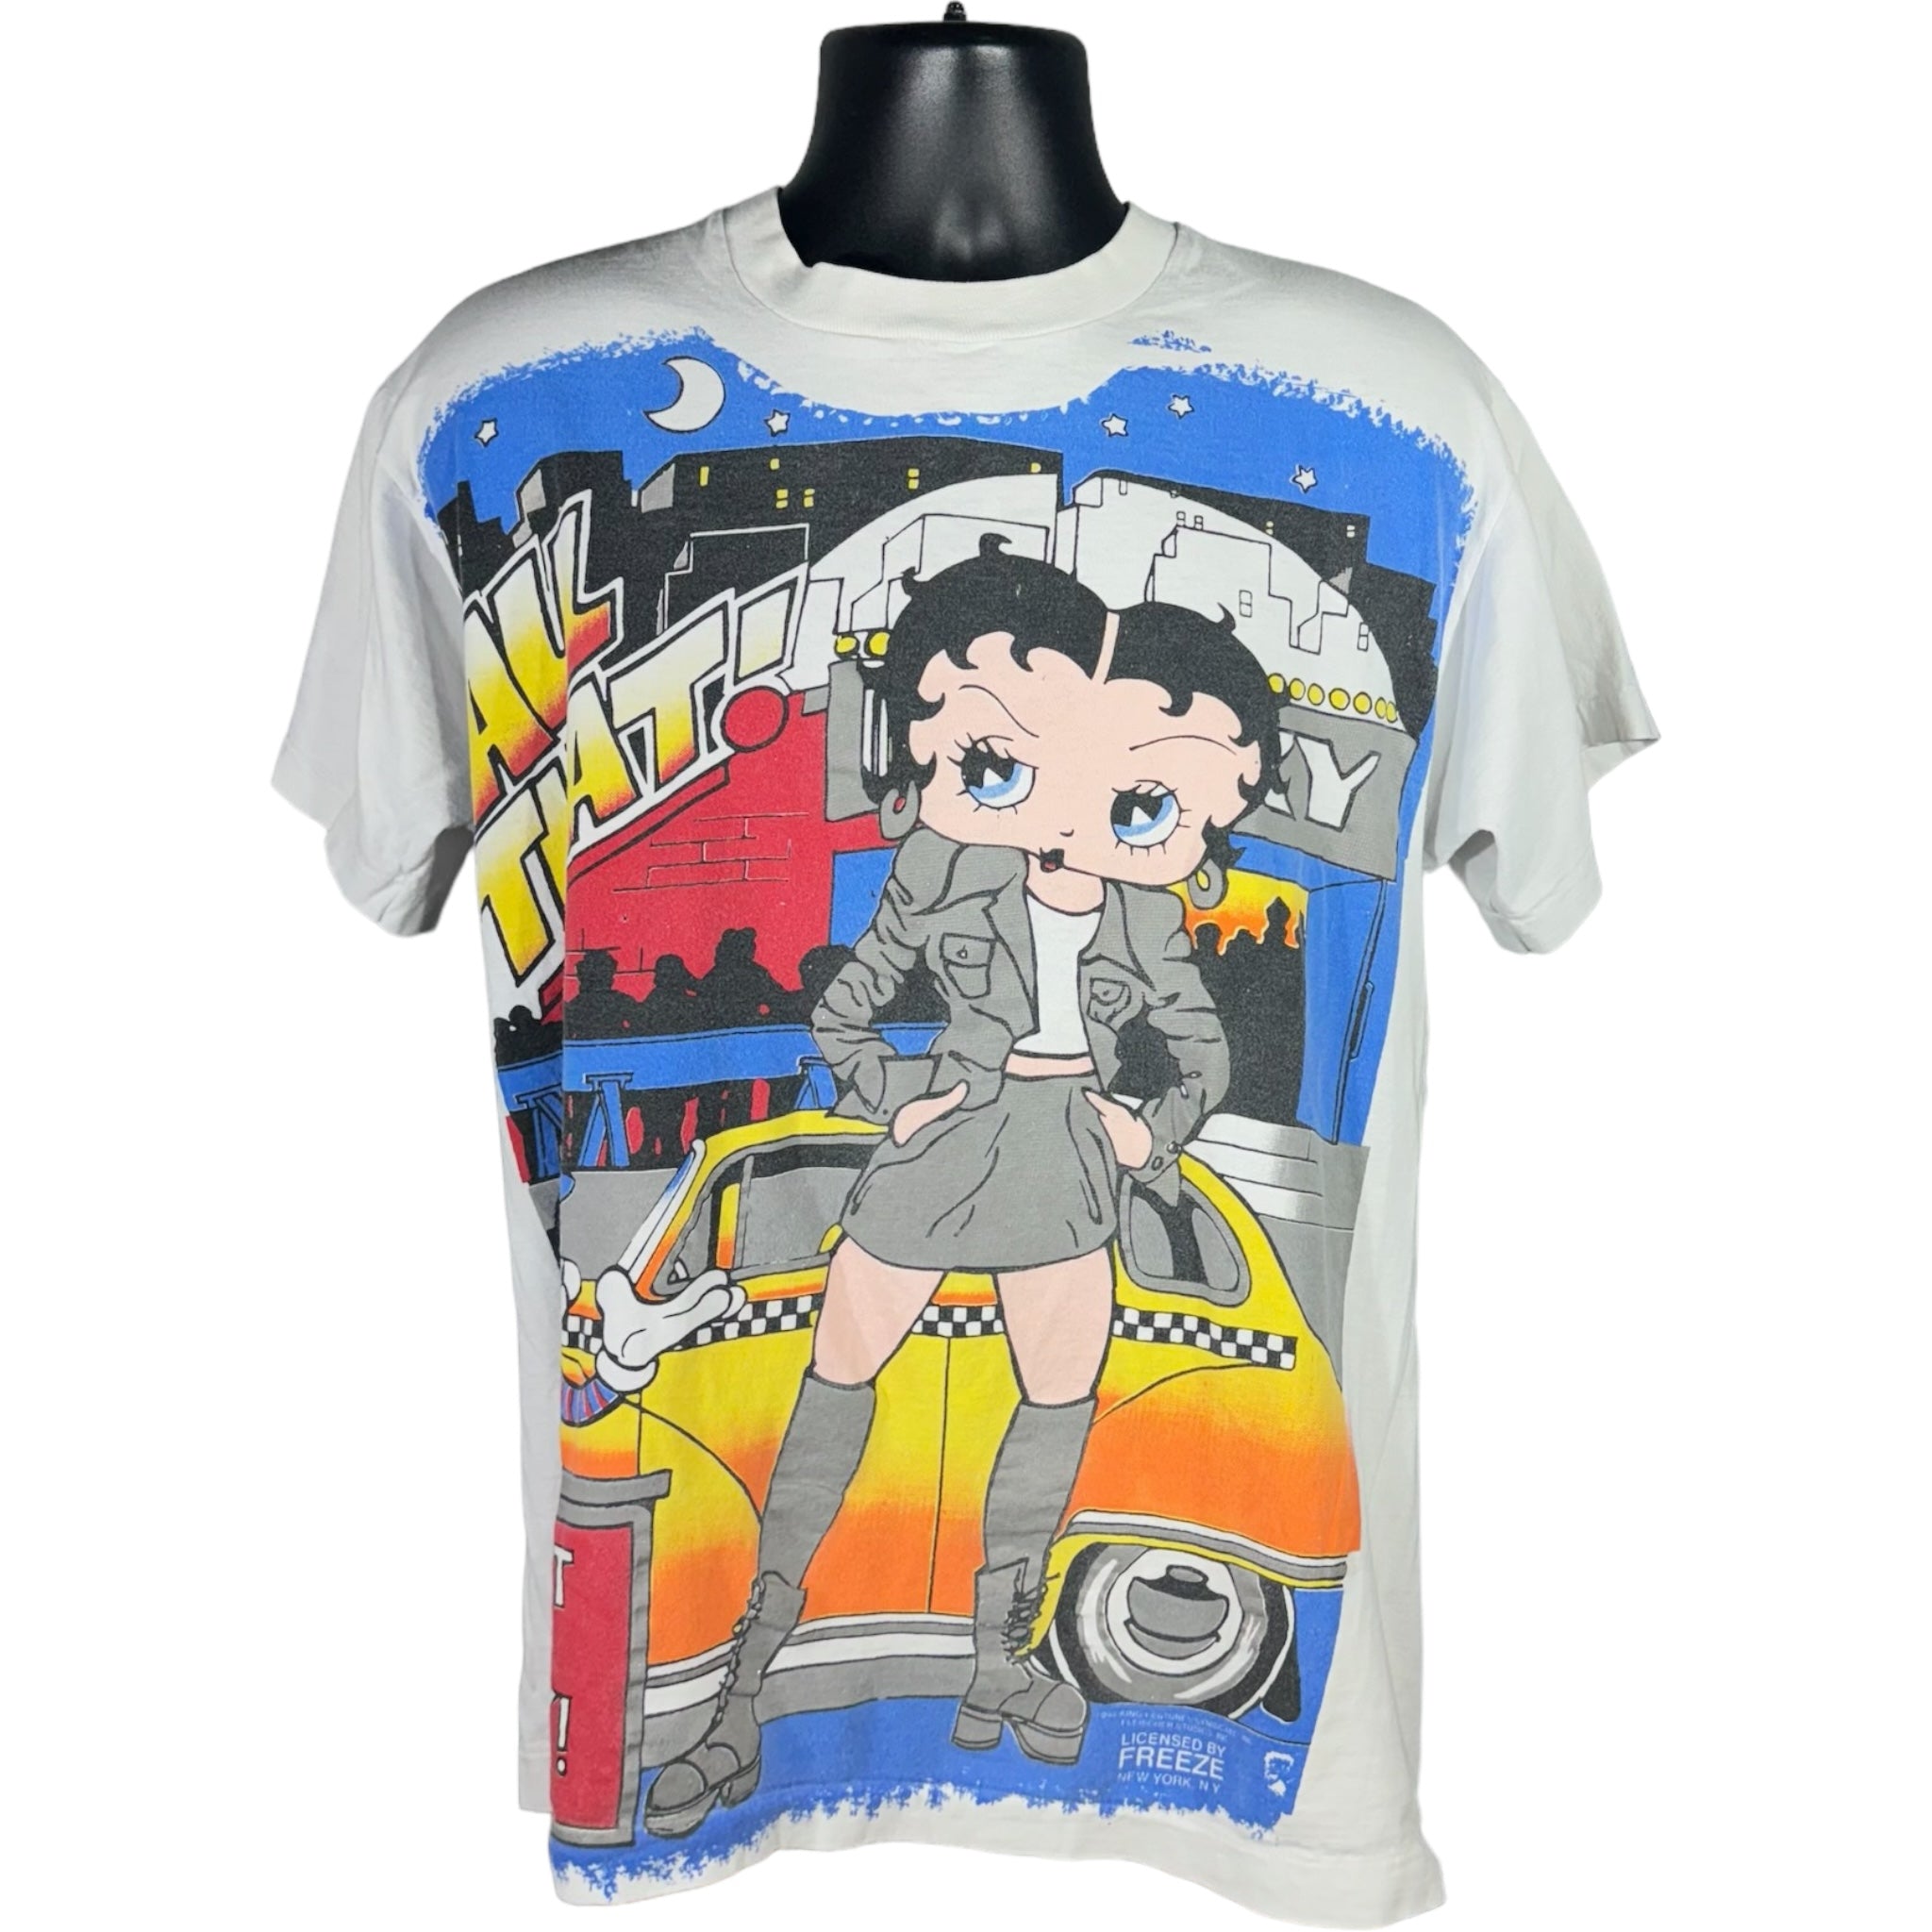 Vintage New York Betty Boop "All That And More" Tee 1994